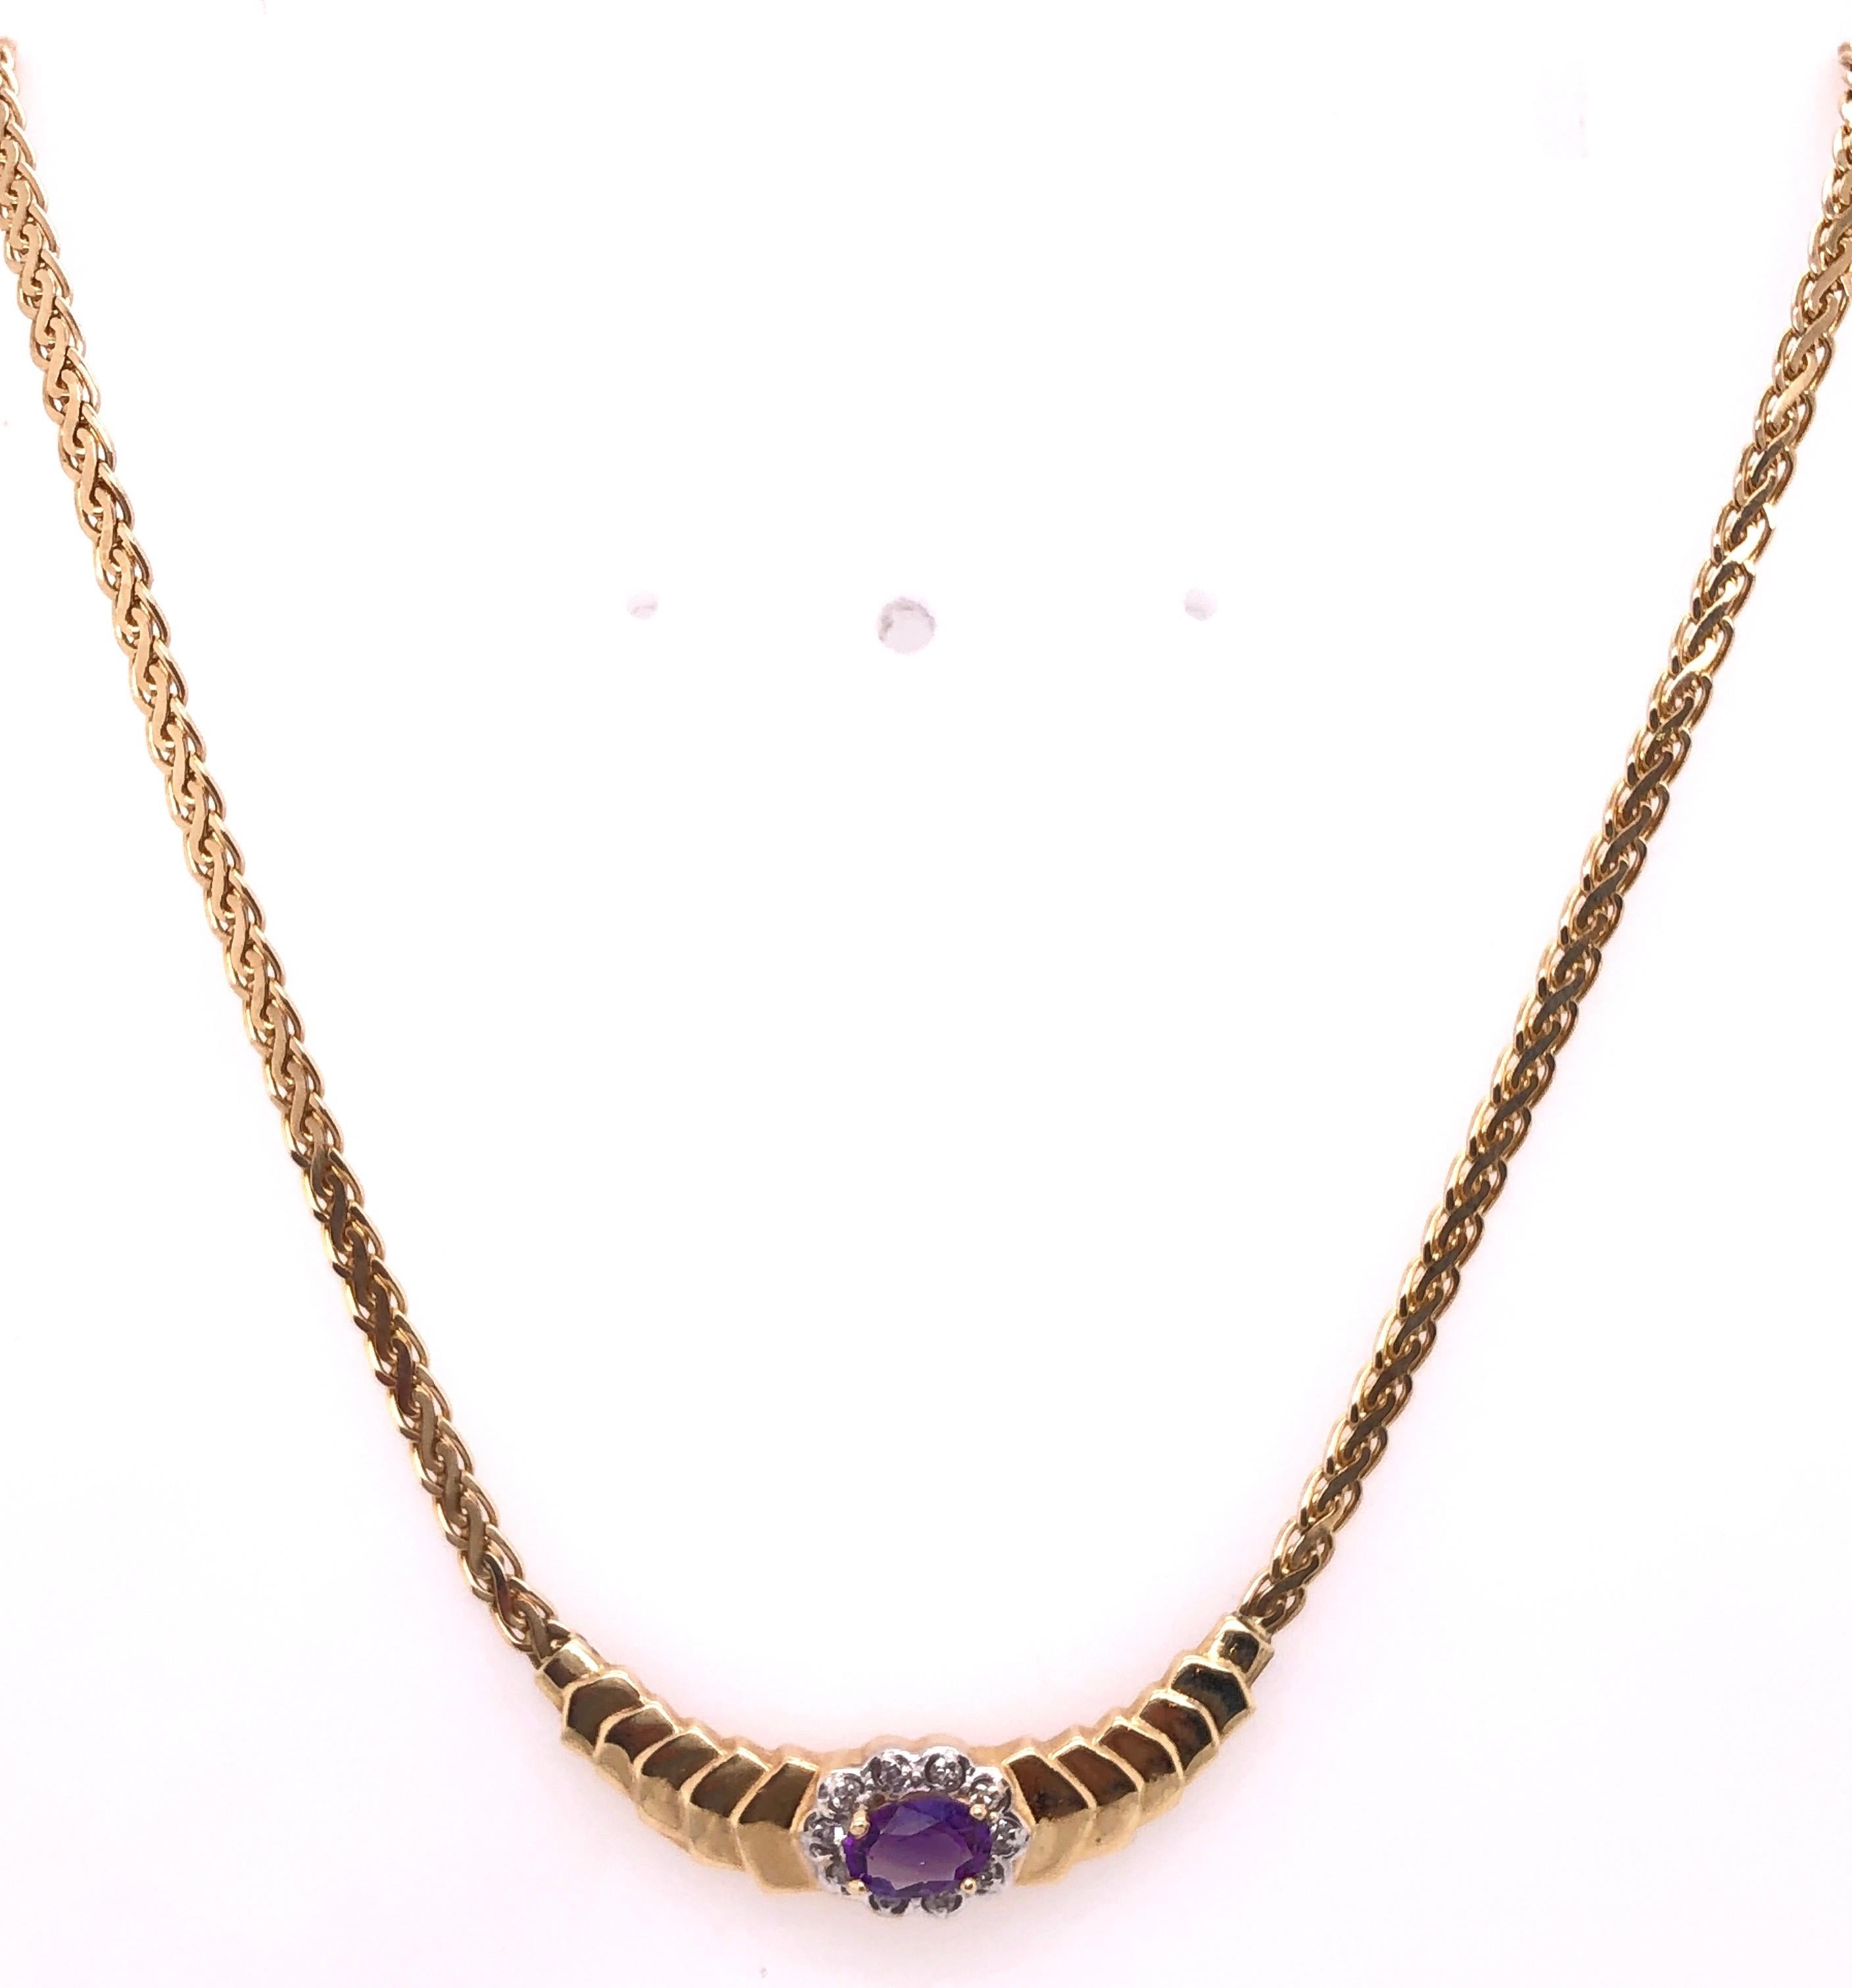 14Kt Yellow Gold 17 inches Cable Necklace 0.10 Total Diamond Weight
8.92 grams total weight 
